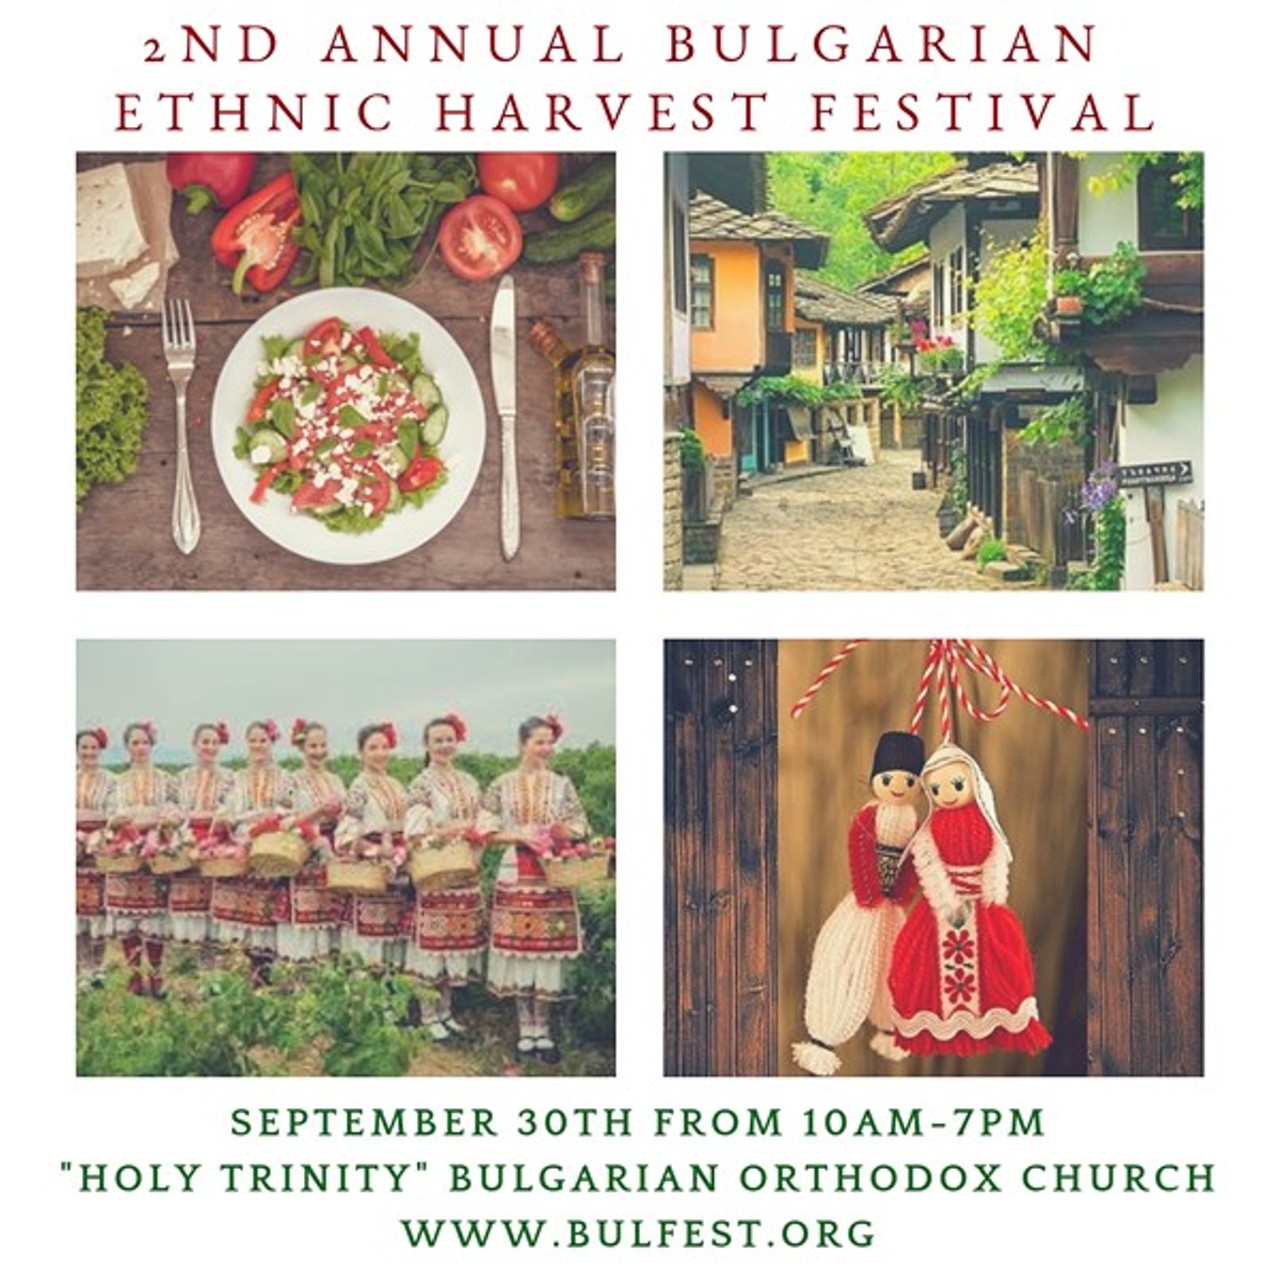 Bulgarian Ethnic Harvest Festival
September 30, 2018
Enjoy and explore the culture and traditions of Bulgaria with authentic food, music and dancing. Bring the kids, there will be games and activities for all age groups.
Check it out here.
Photo courtesy of Bulgarian Ethnic Harvest Festival